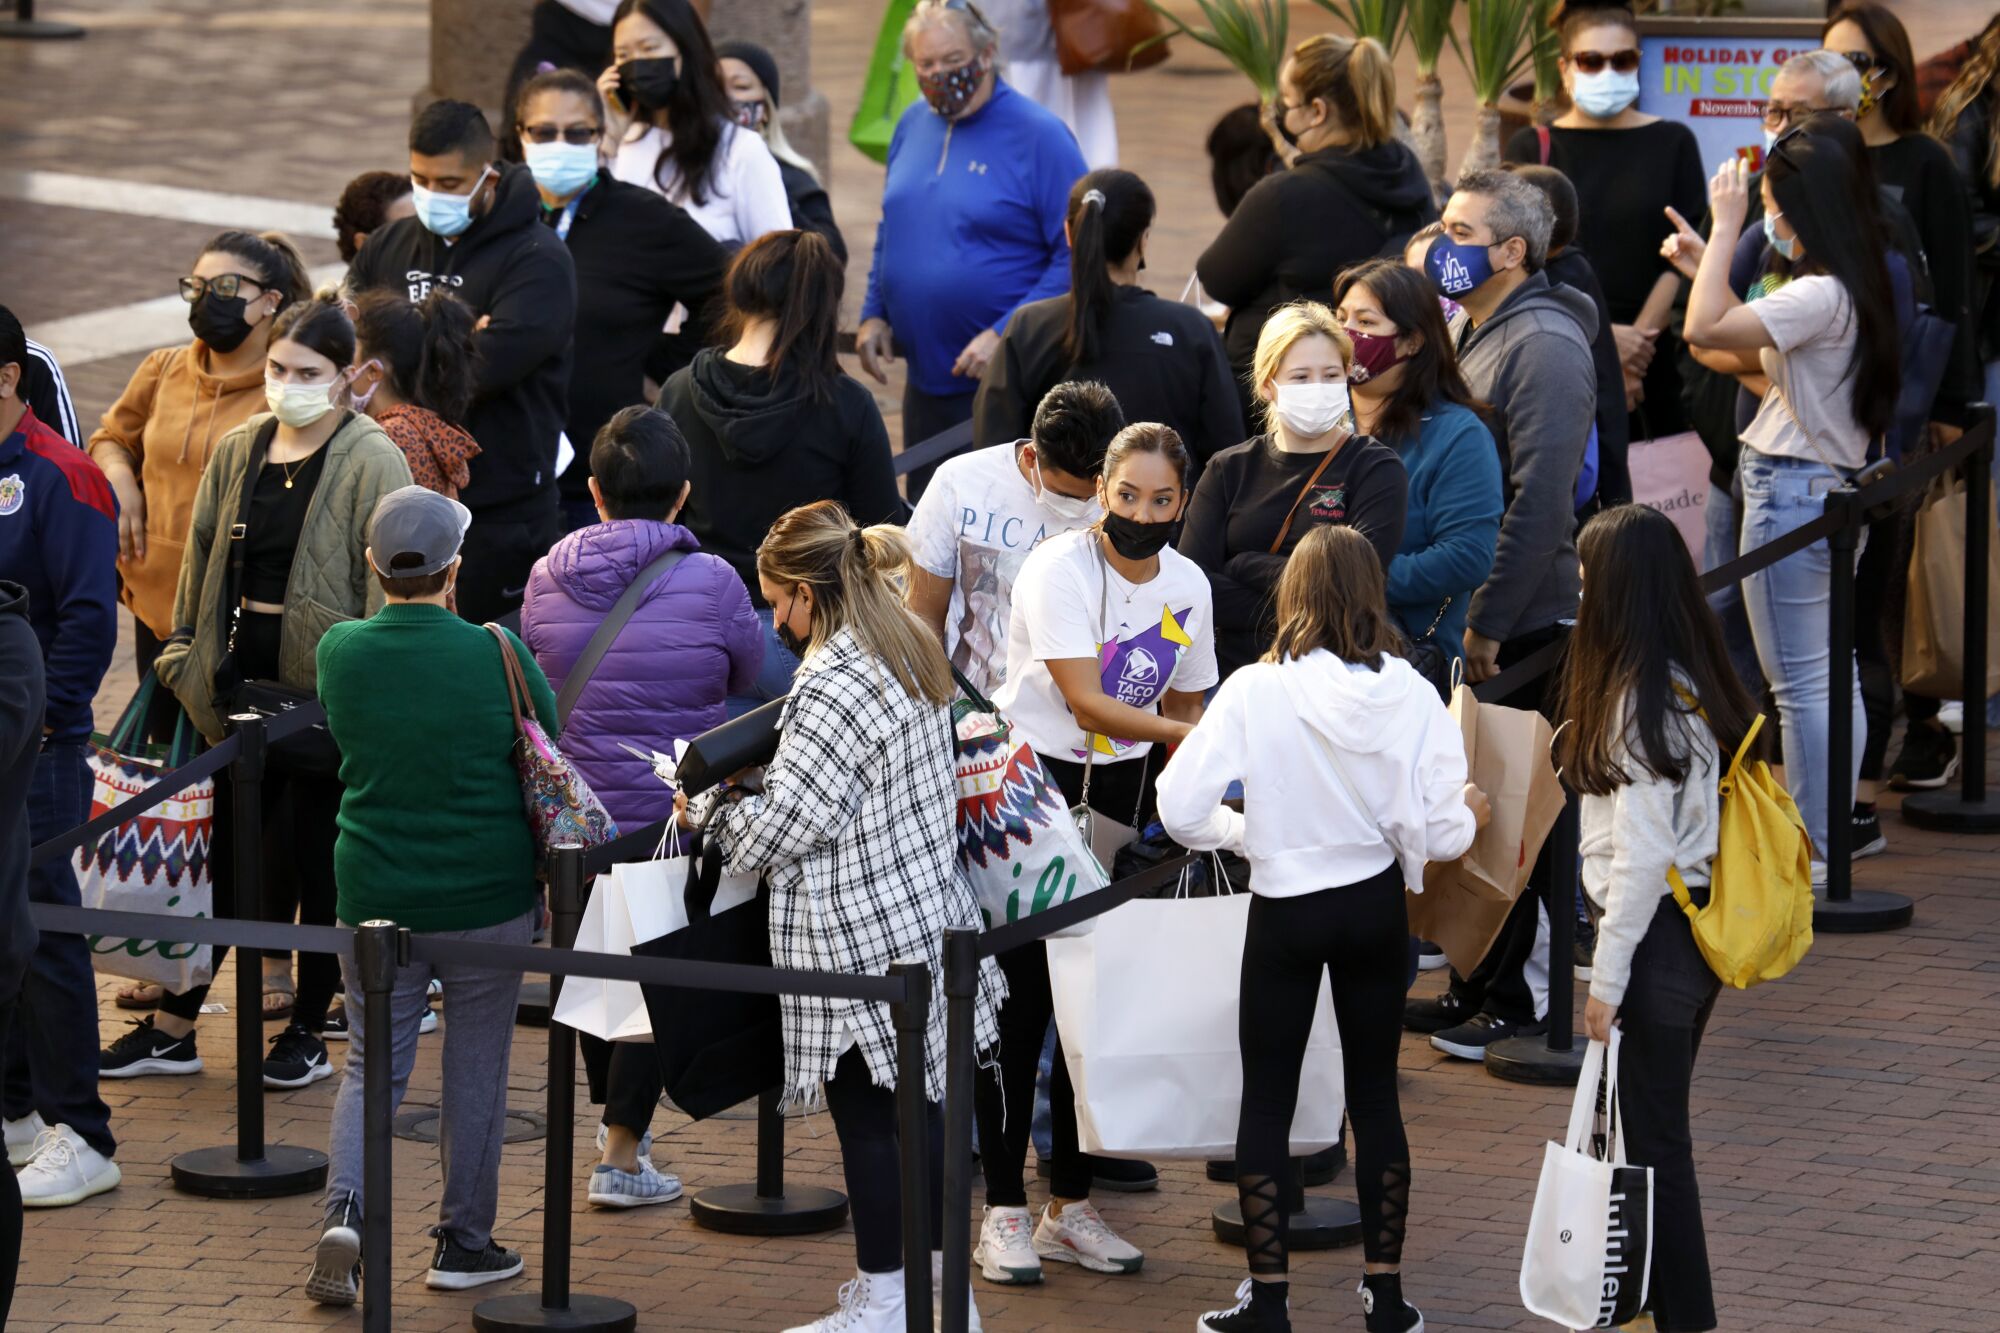 A Black Friday queue forms outside the Coach store at the Citadel Outlets.